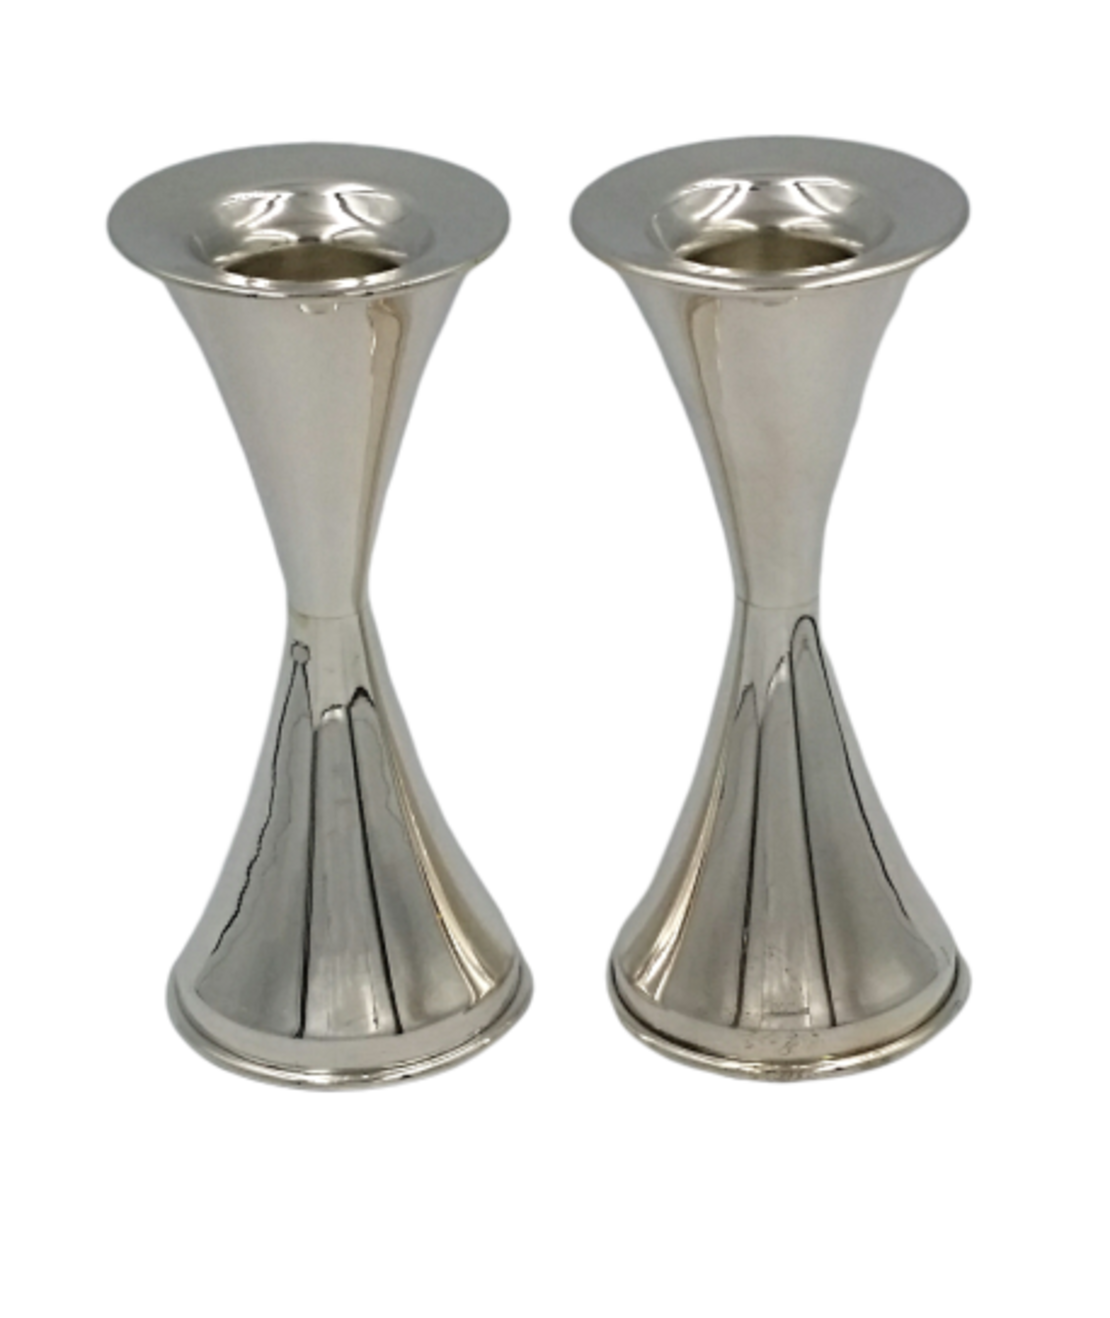 A pair of pure silver M hourglass candlesticks